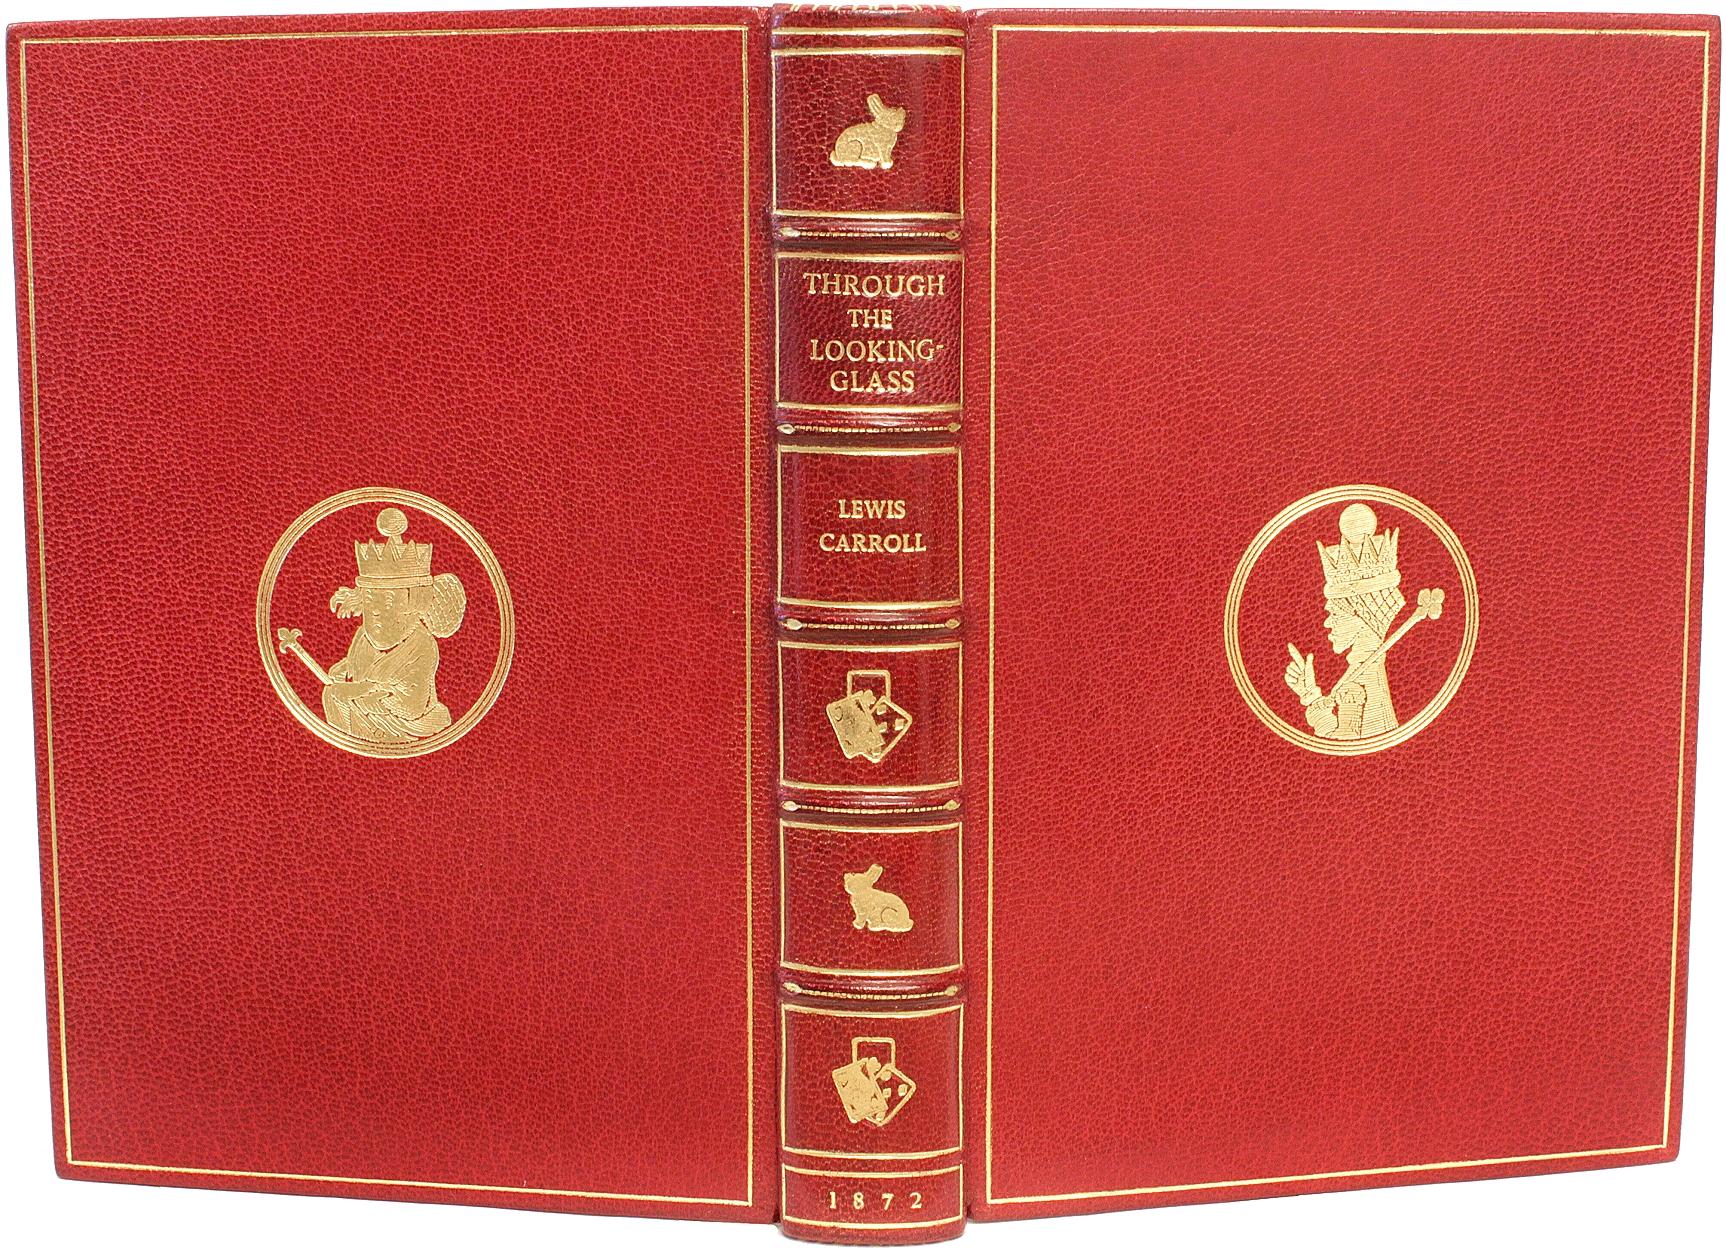 Leather Lewis Carroll - through the Looking-Glass. 1872 First Edition Presentation Copy For Sale